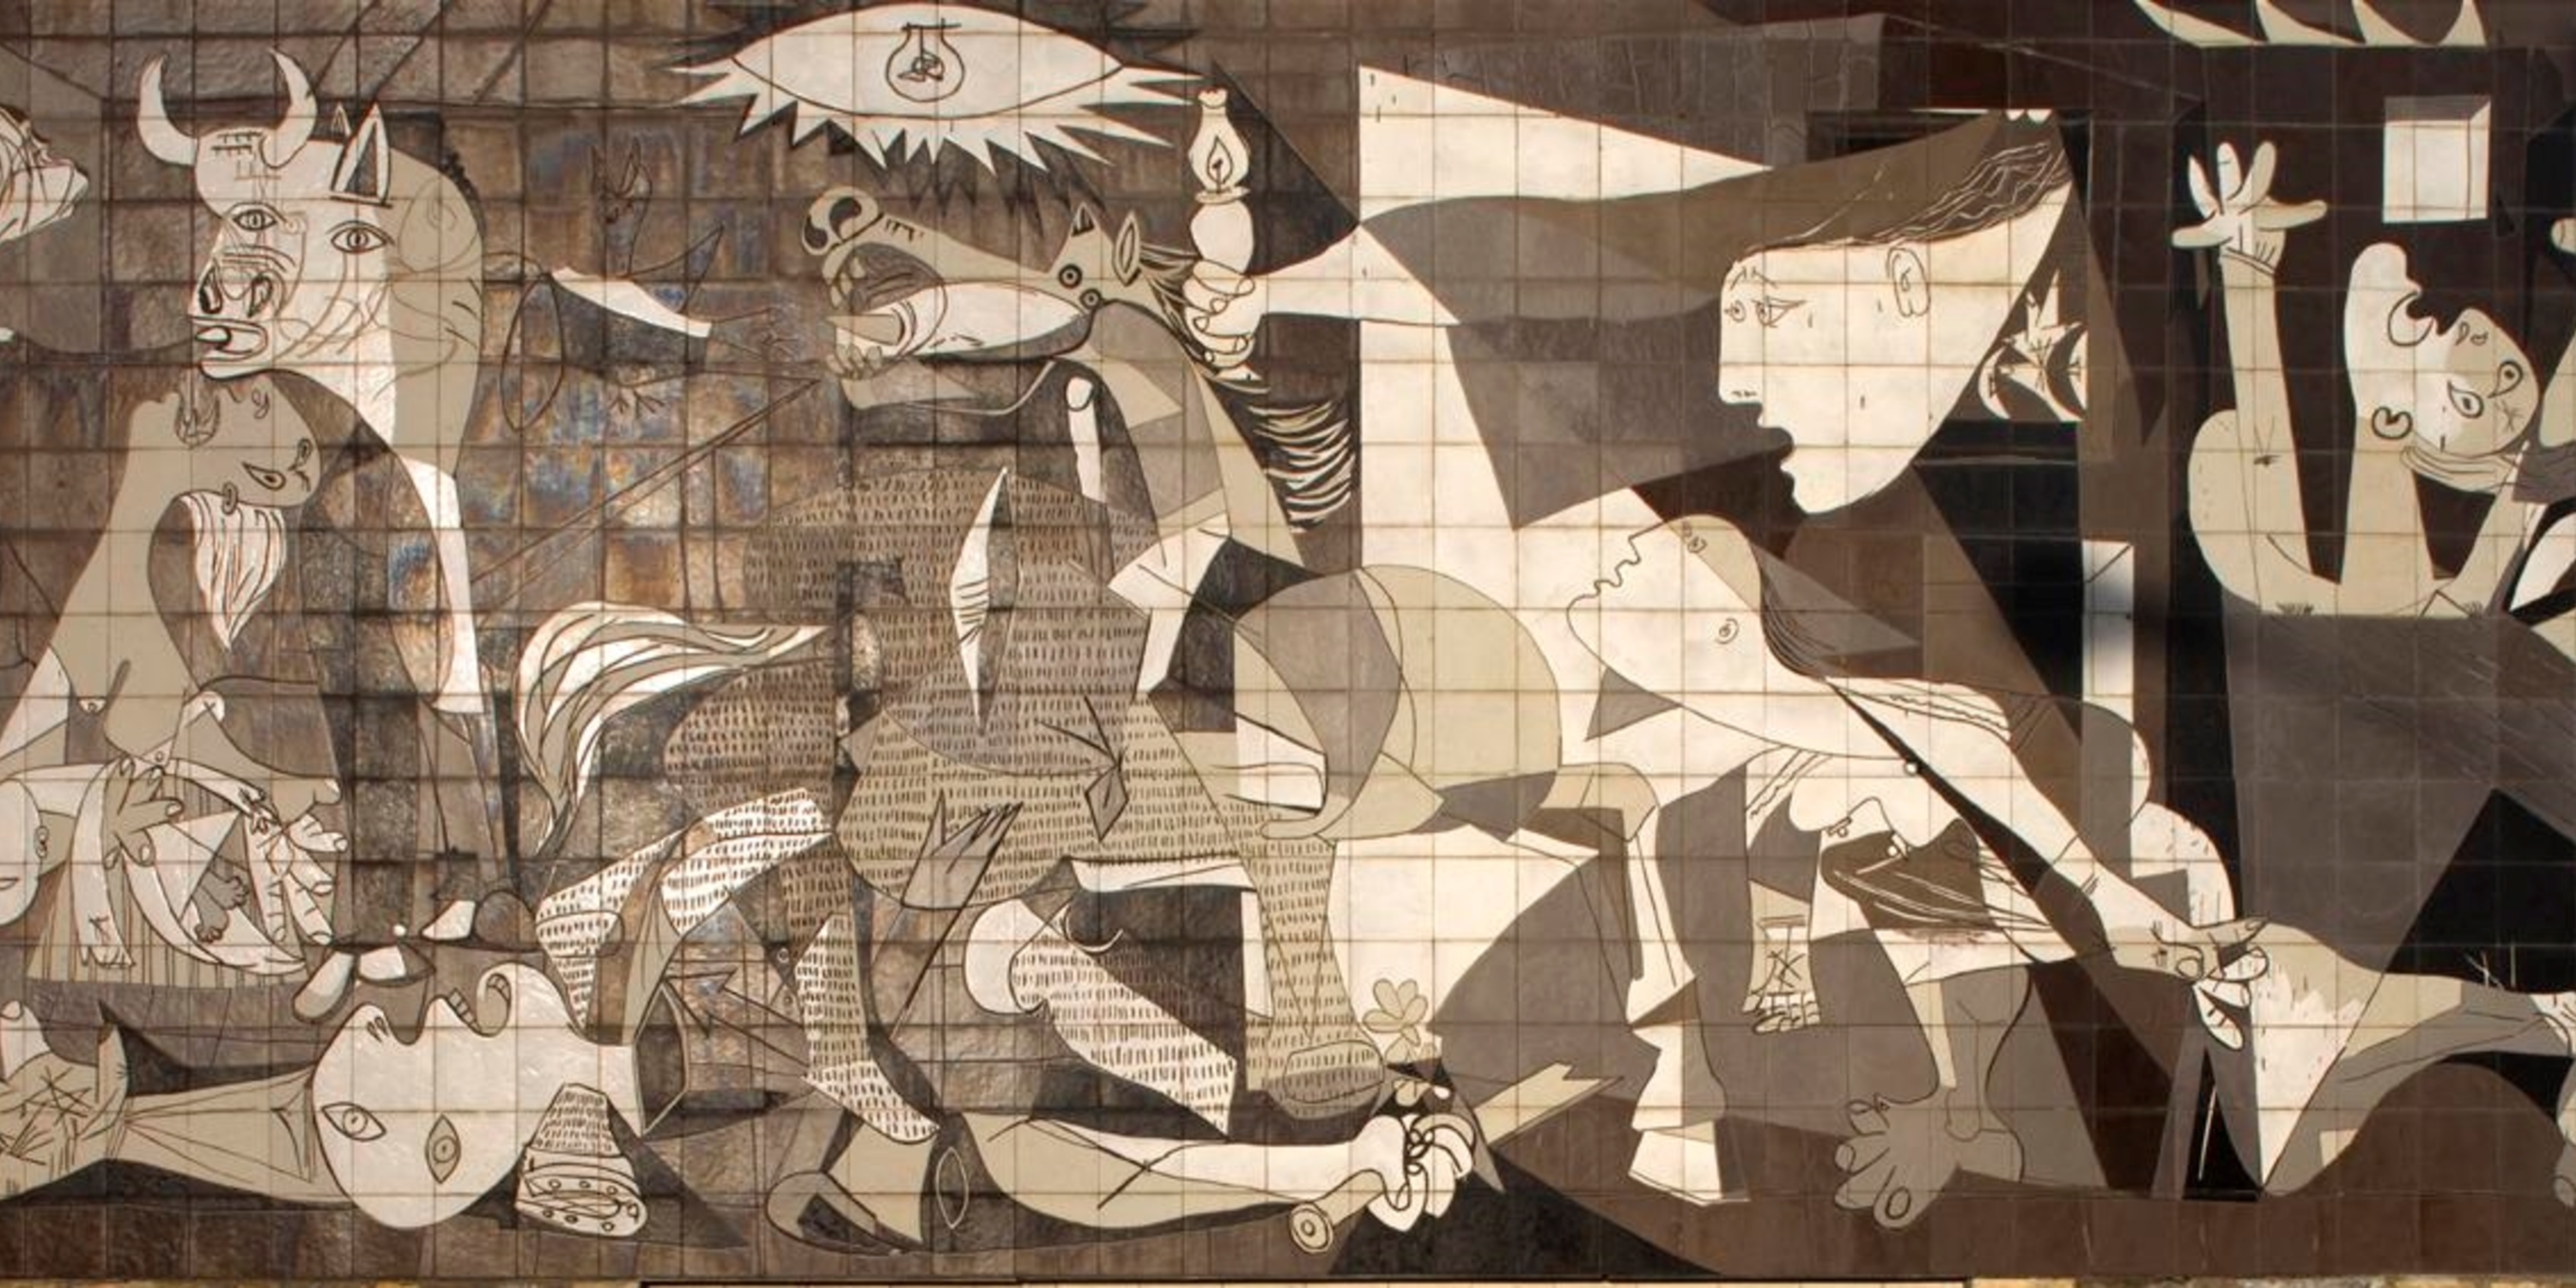 Mural in Guernica based on the Picasso painting. 